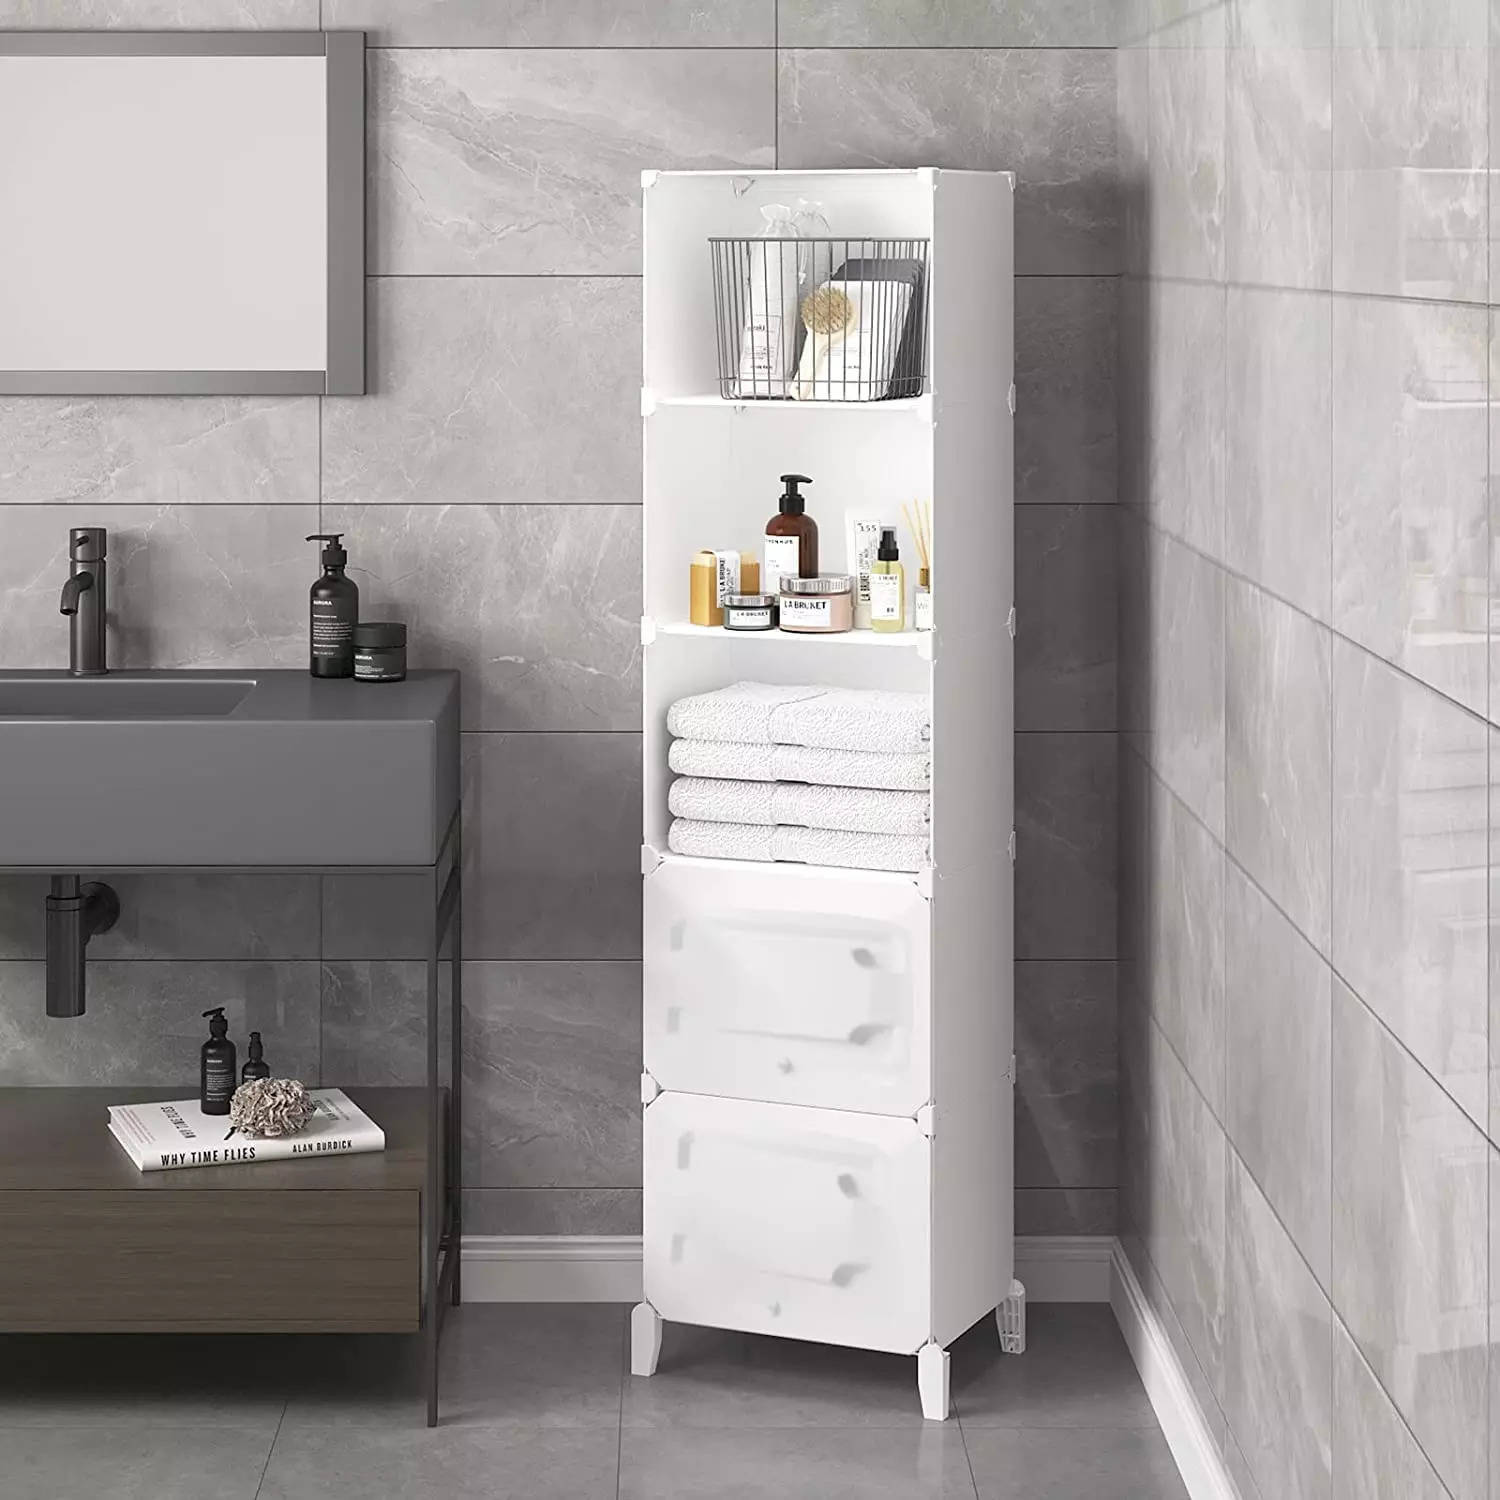 10 Stylish Bathroom Cabinets Under 3000: Chic and Budget-Friendly:Image